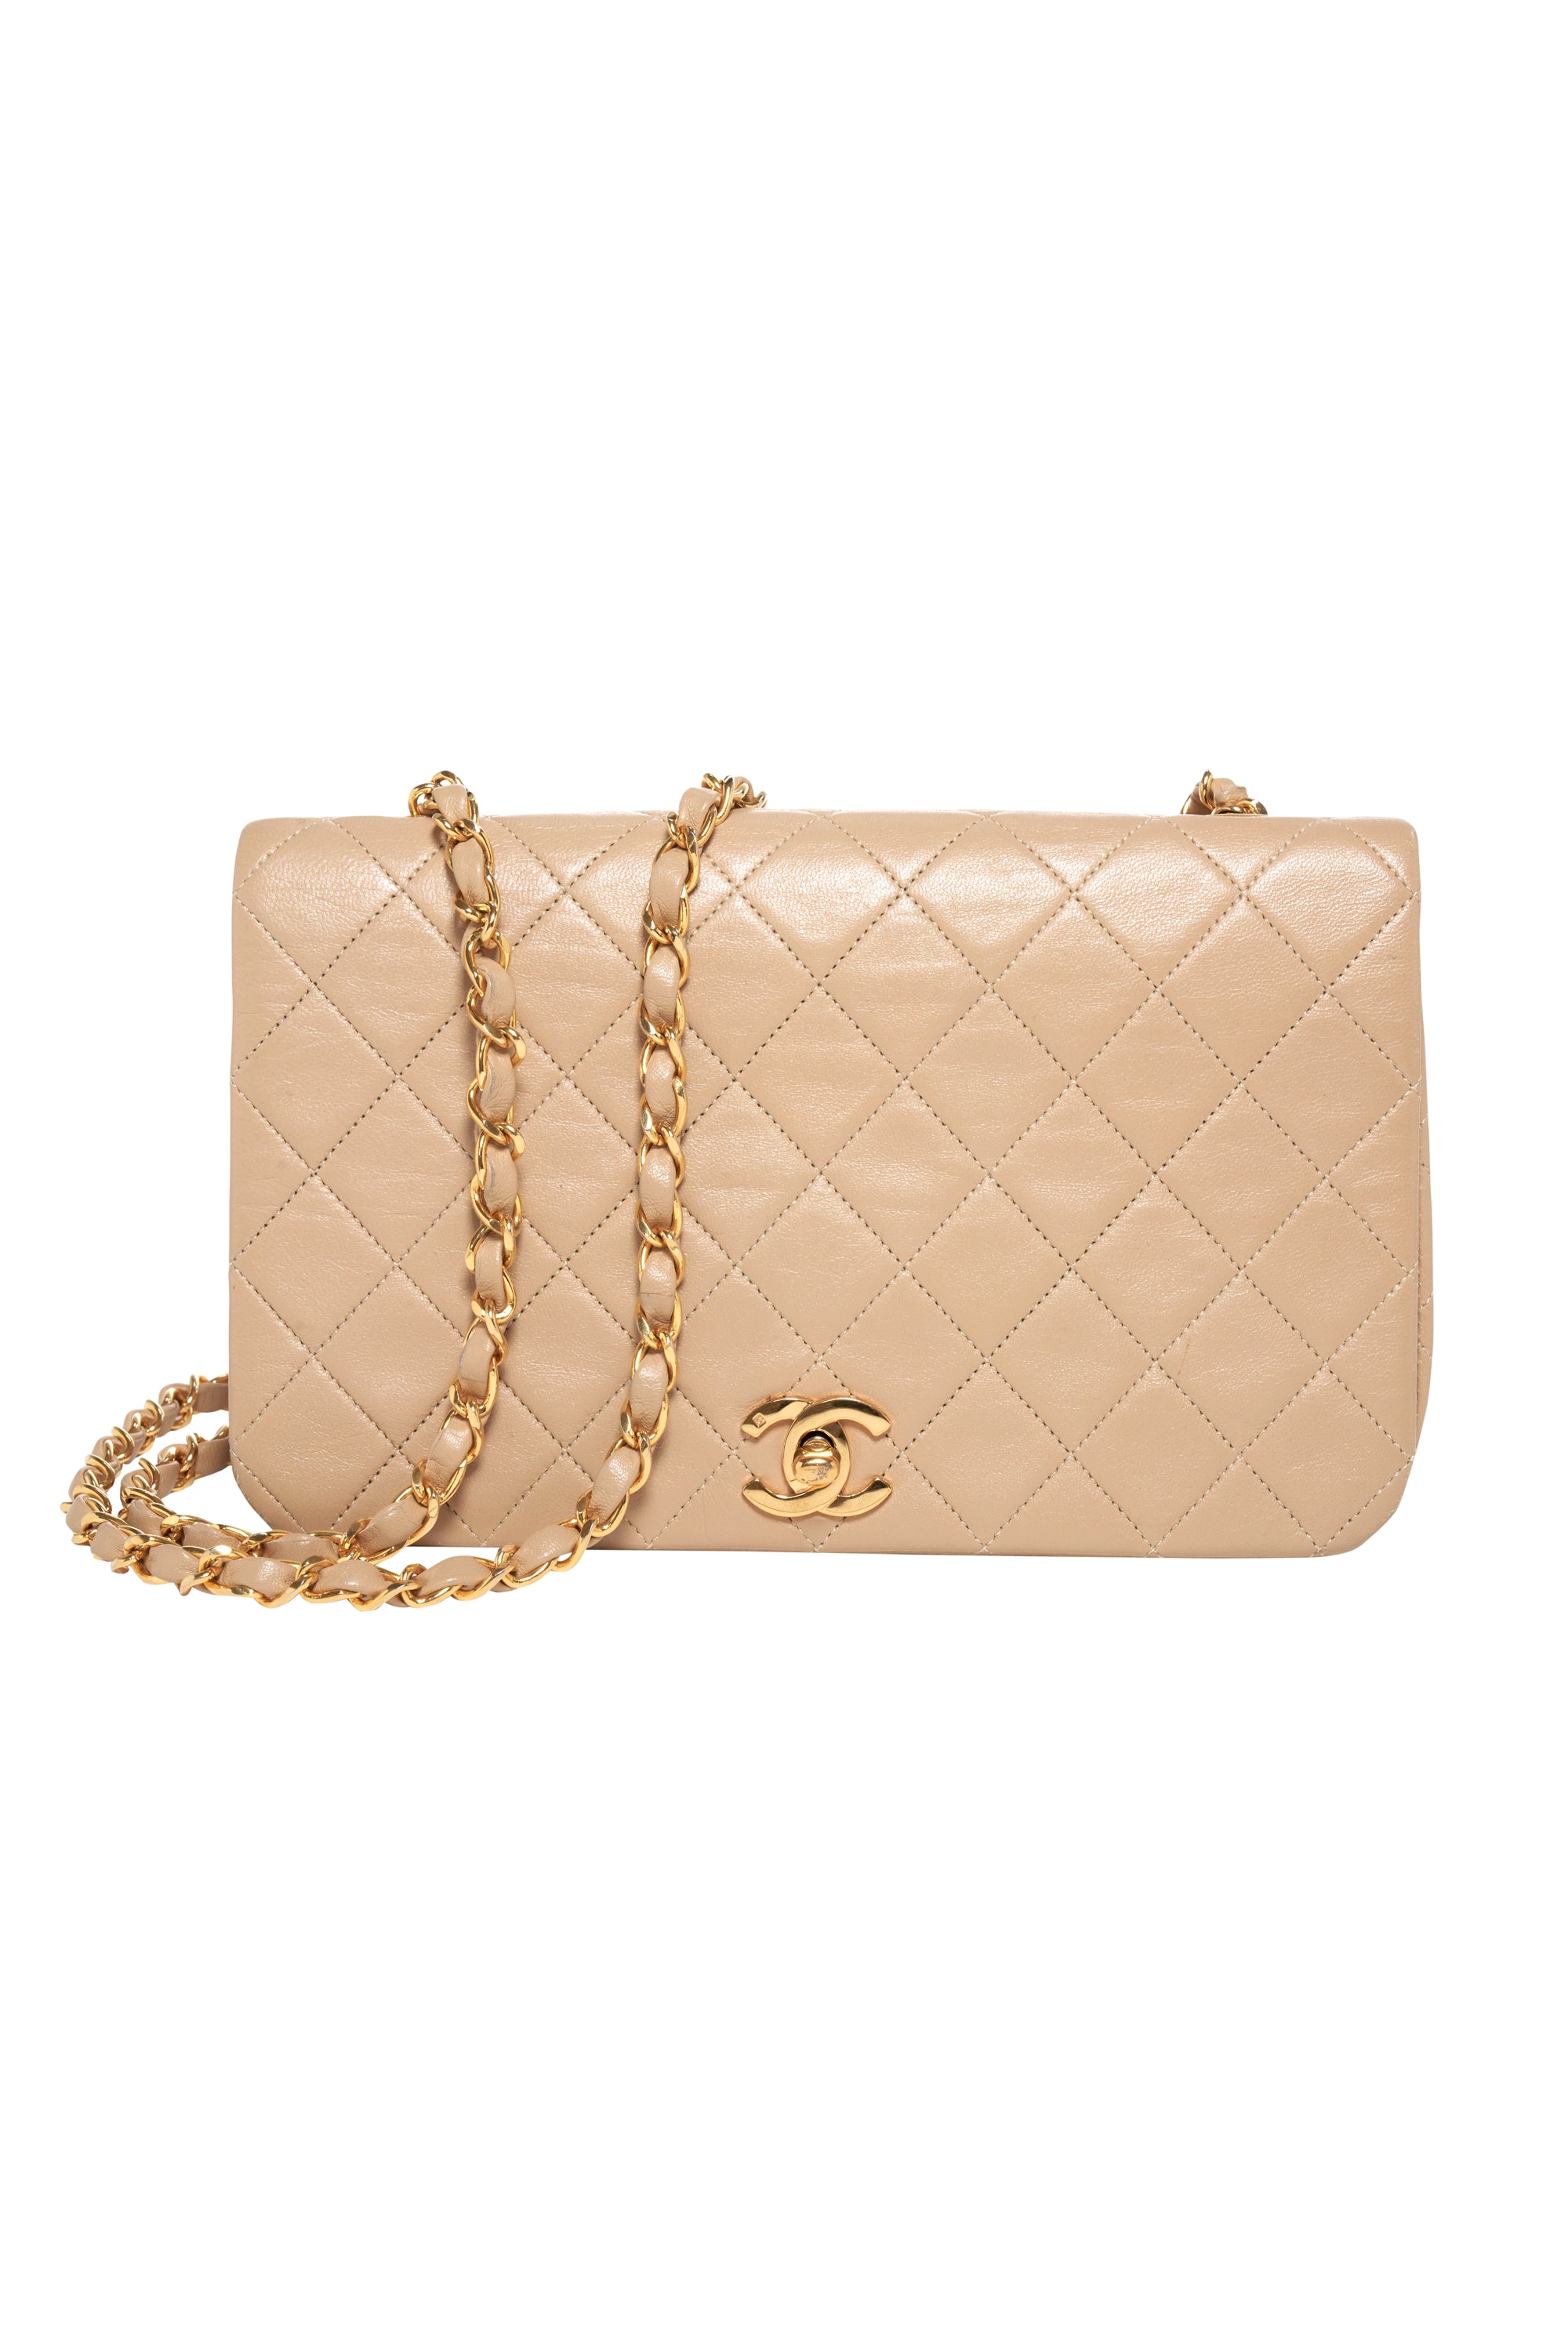 Chanel Vintage Nude Quilted Flap Purse